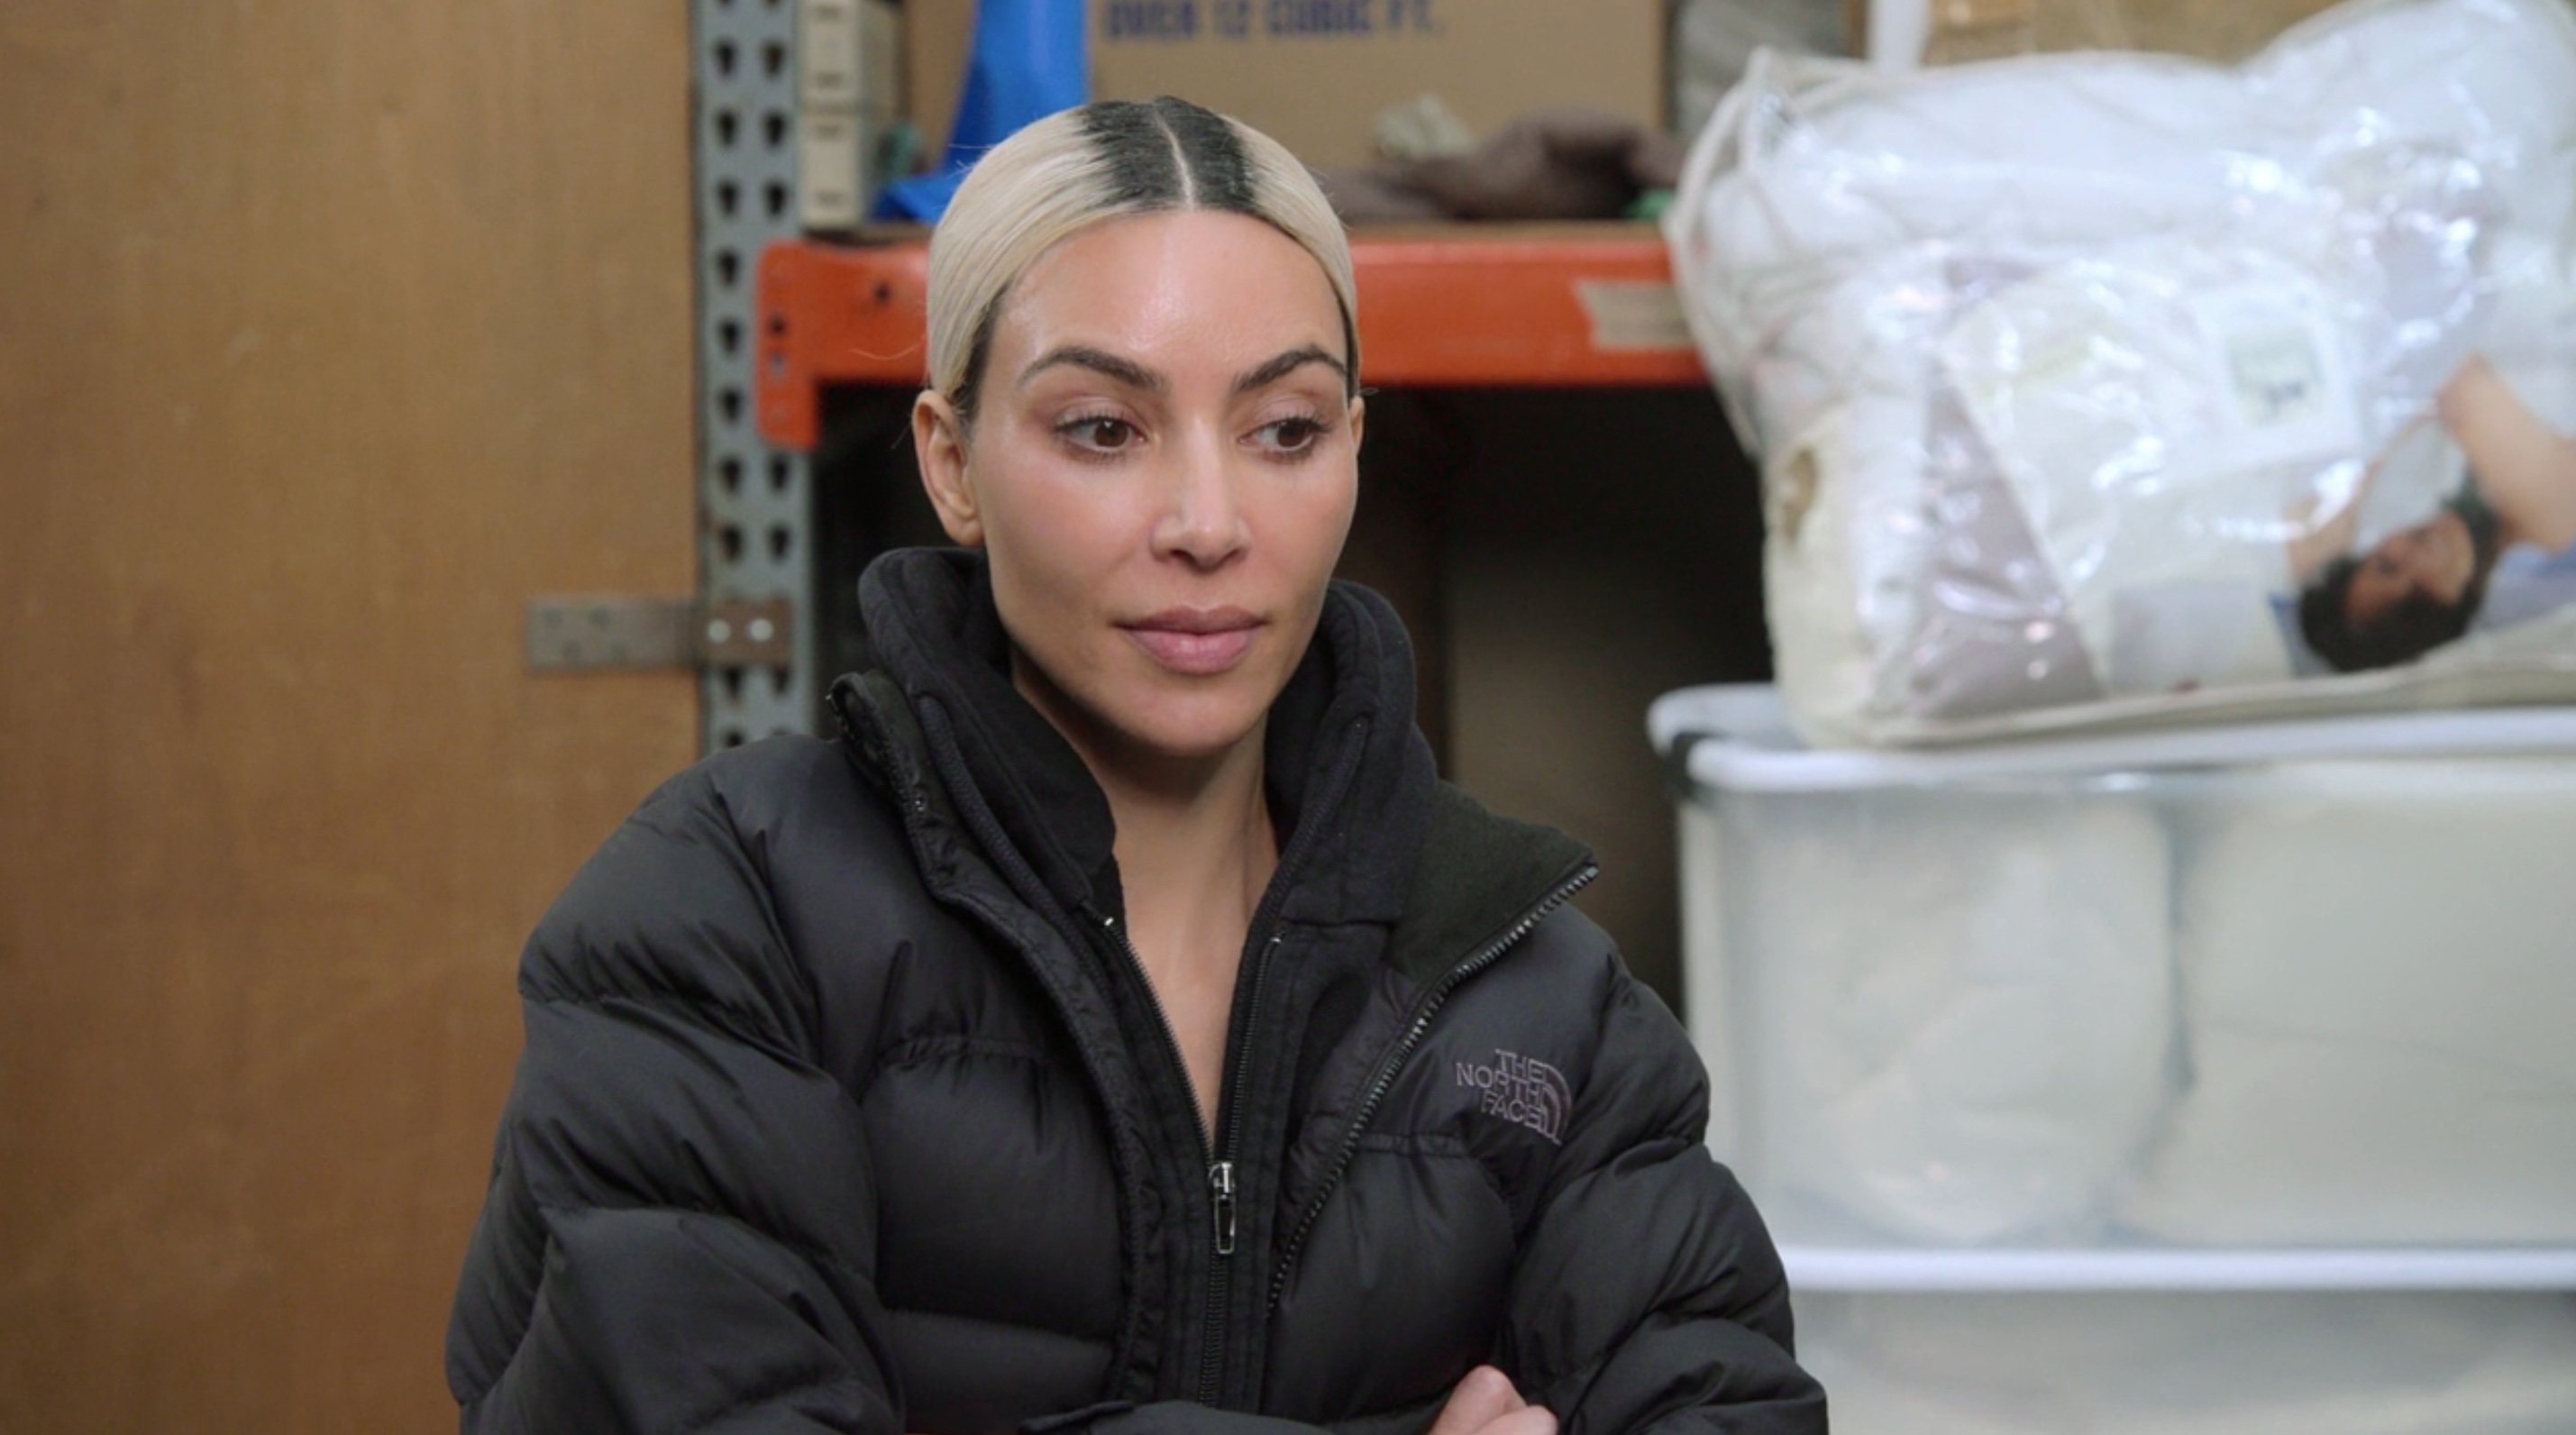 Close-up of Kim amid the racks of clothing